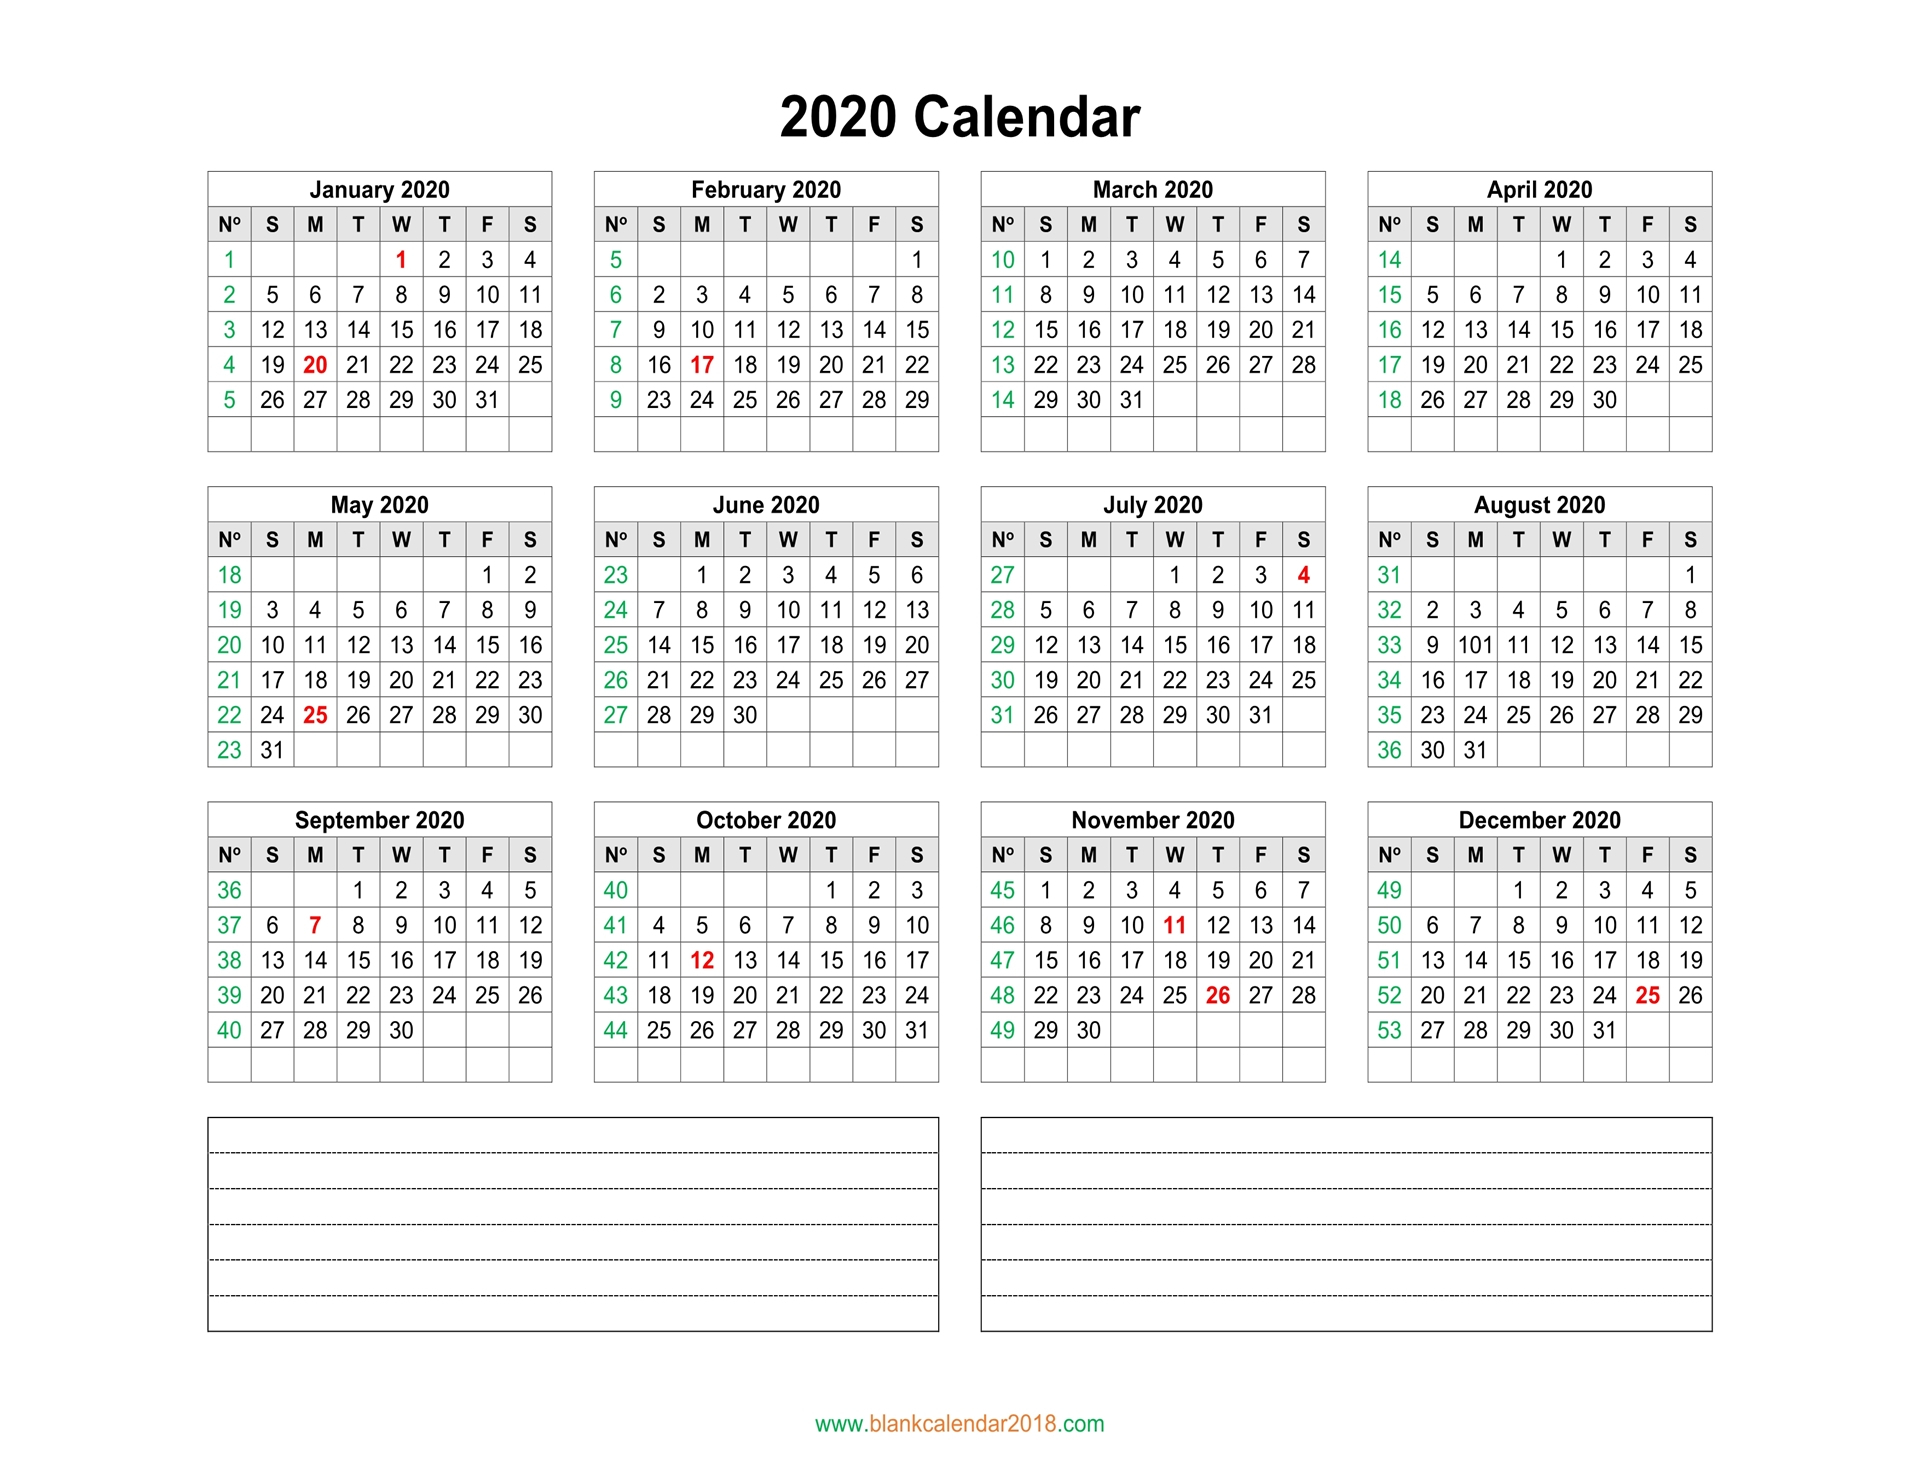 Blank Calendar 2020 With Notes Landscape